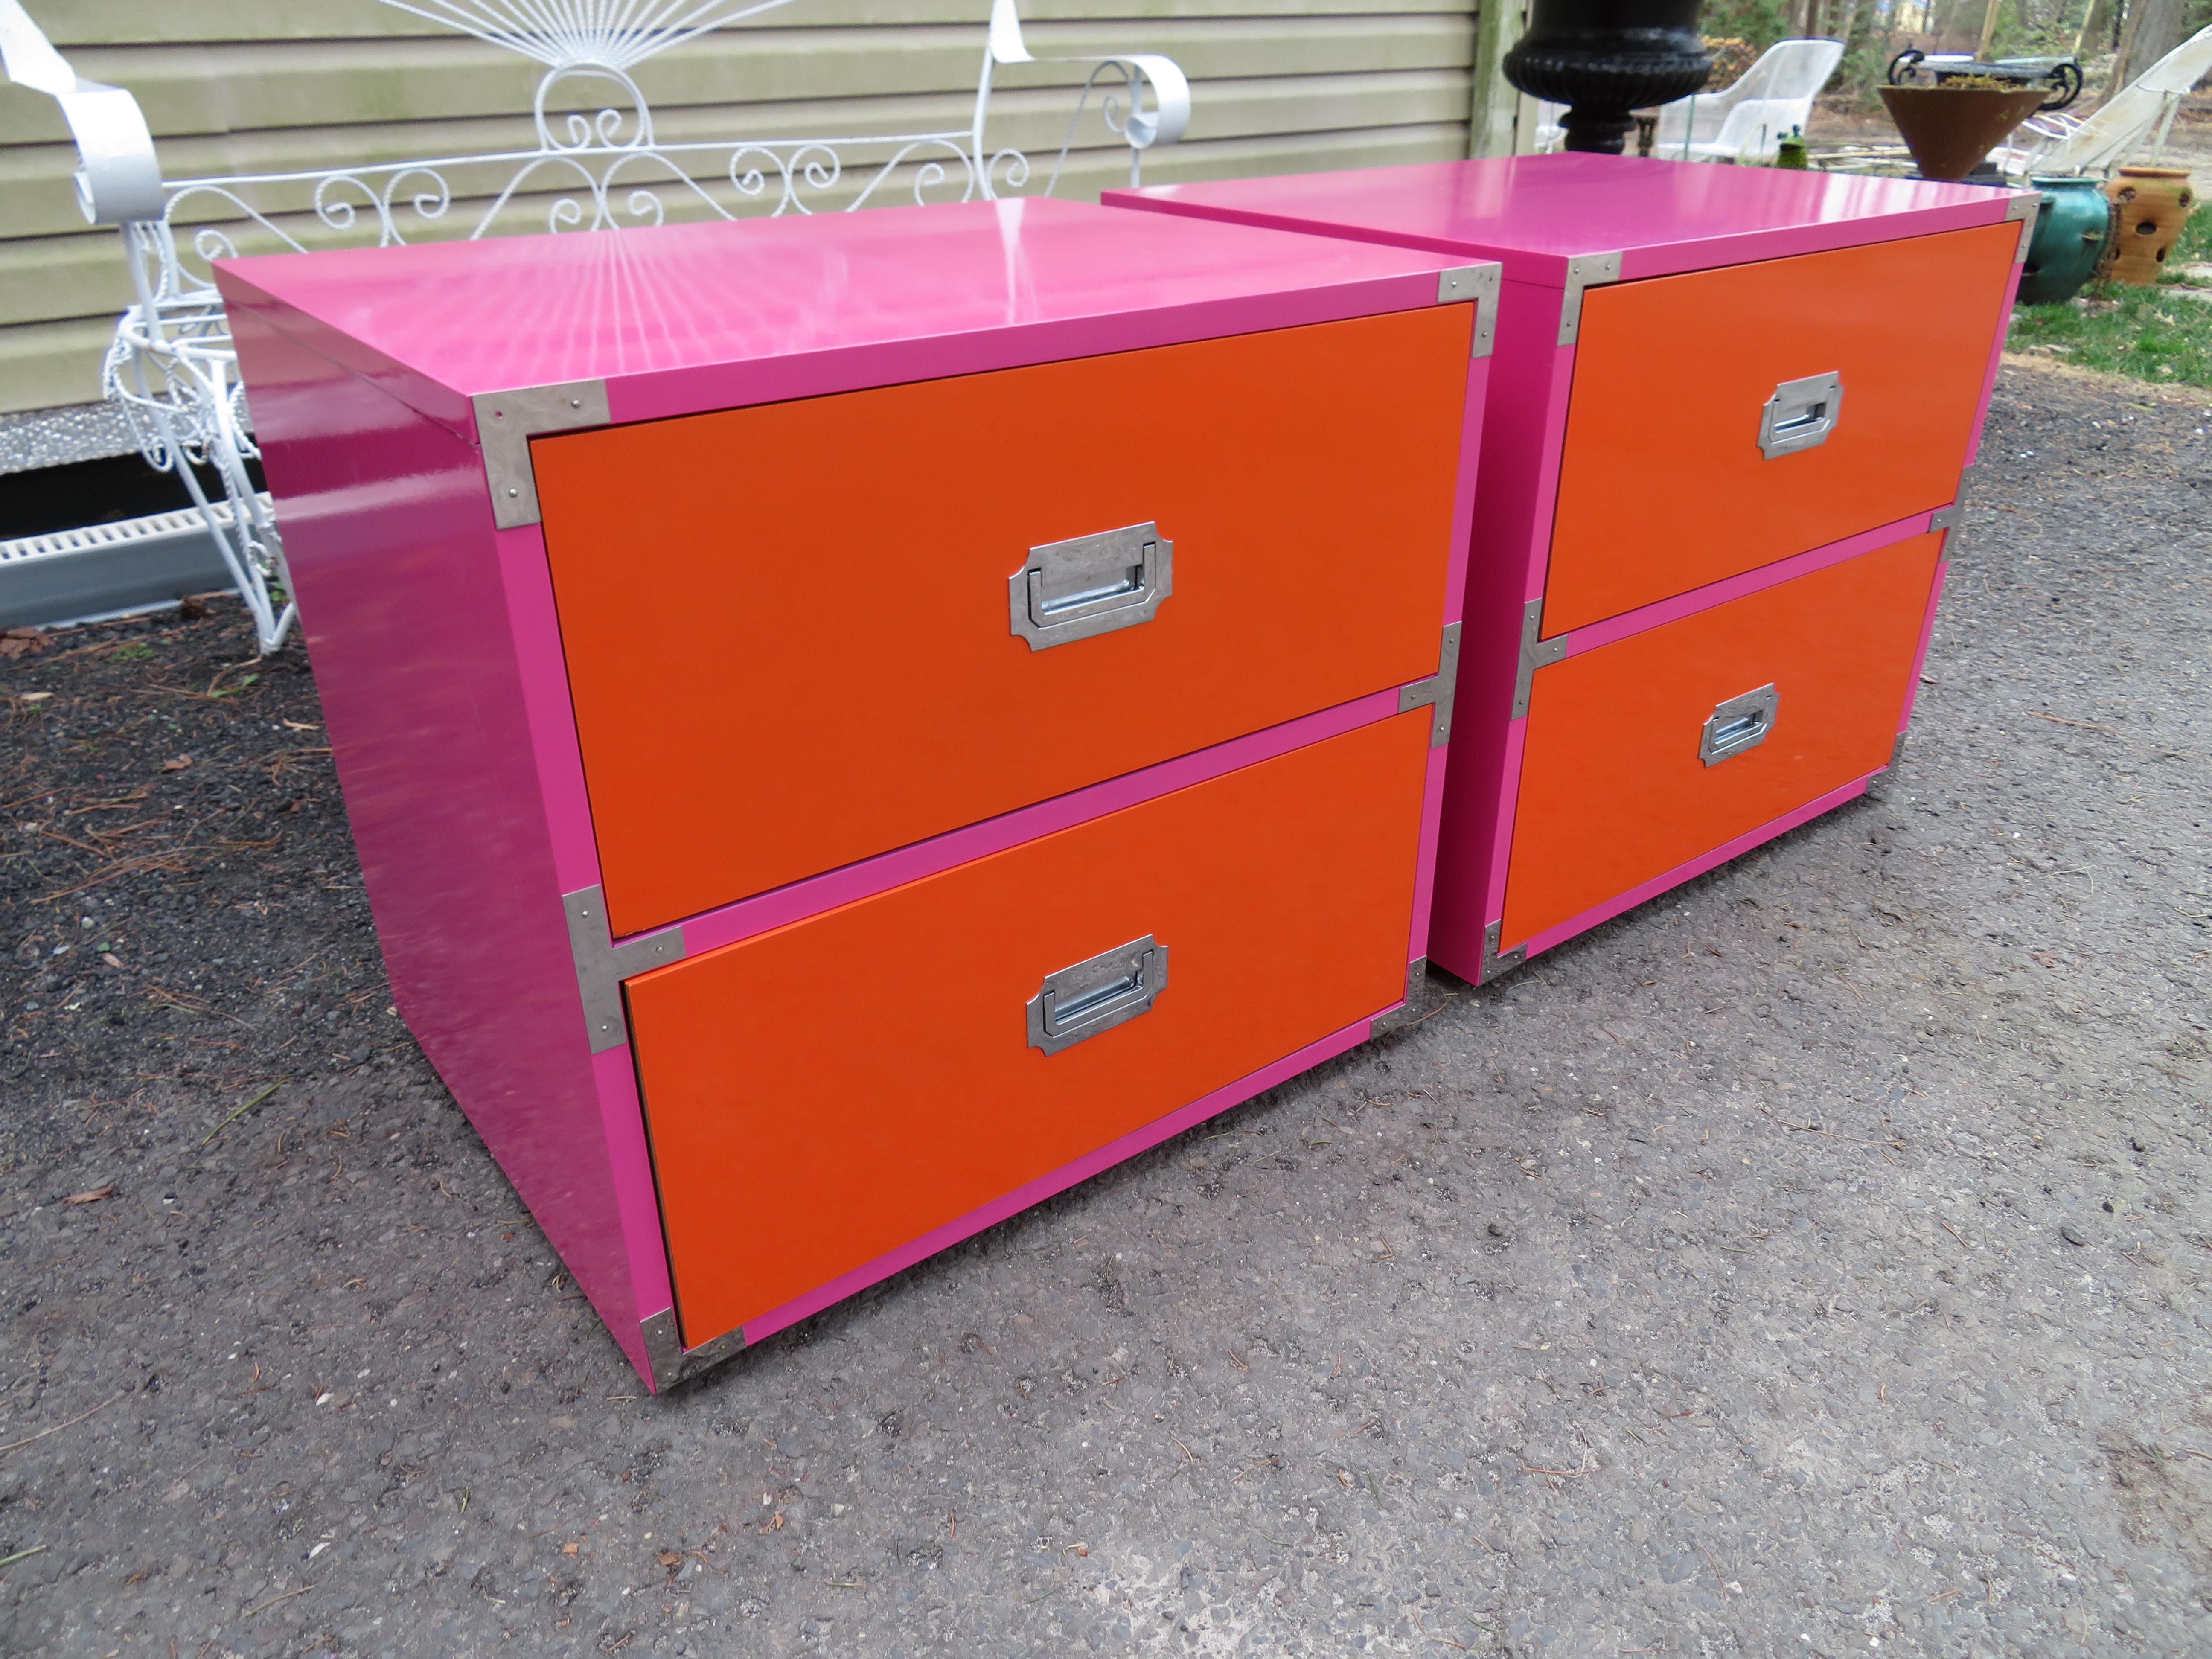 Fun pop colored pair of Campaigner nightstands by Dixie. These bespoke pieces have been totally re-imagined in a fabulous glossy lipstick pink case and citrus orange drawers. We took inspiration from the new trend to color clash and wow what great